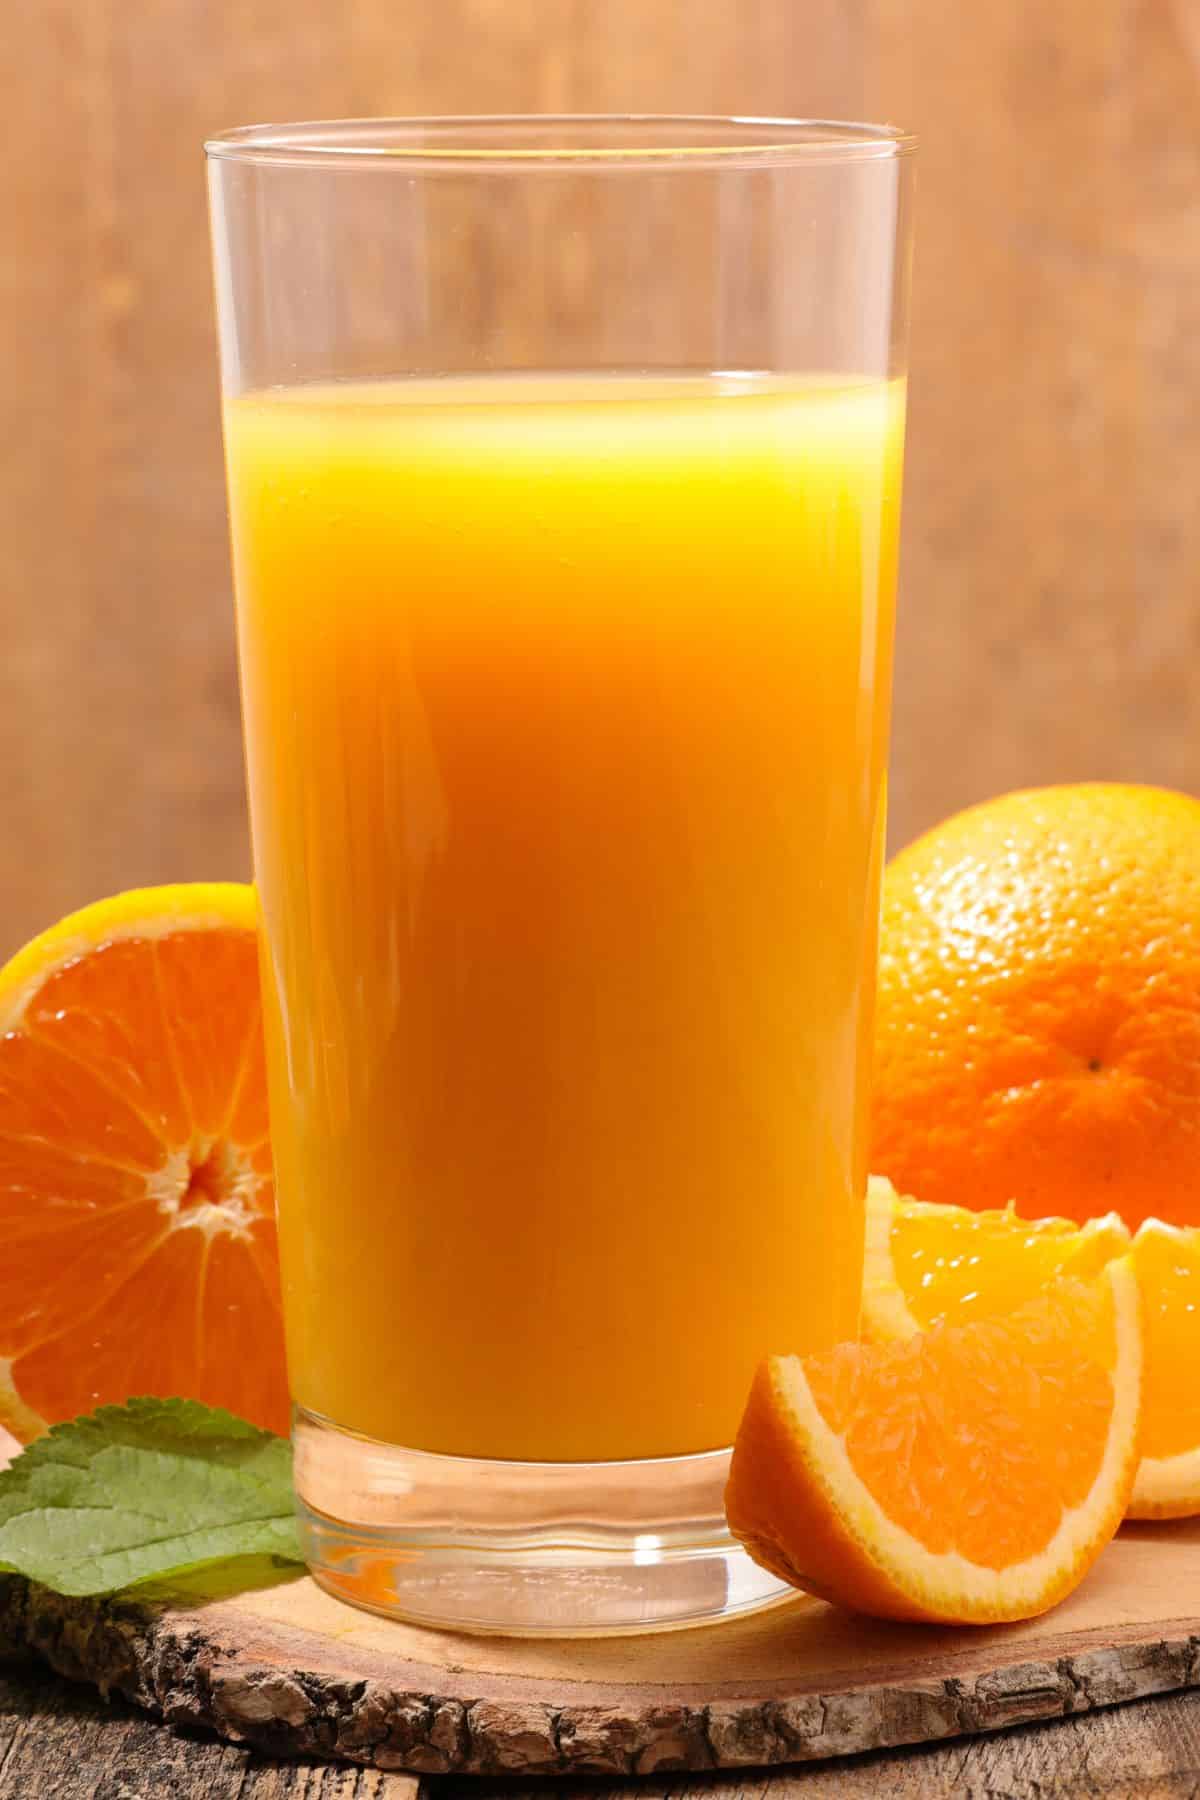 Tall glass of orange juice surrounded by orange slices.